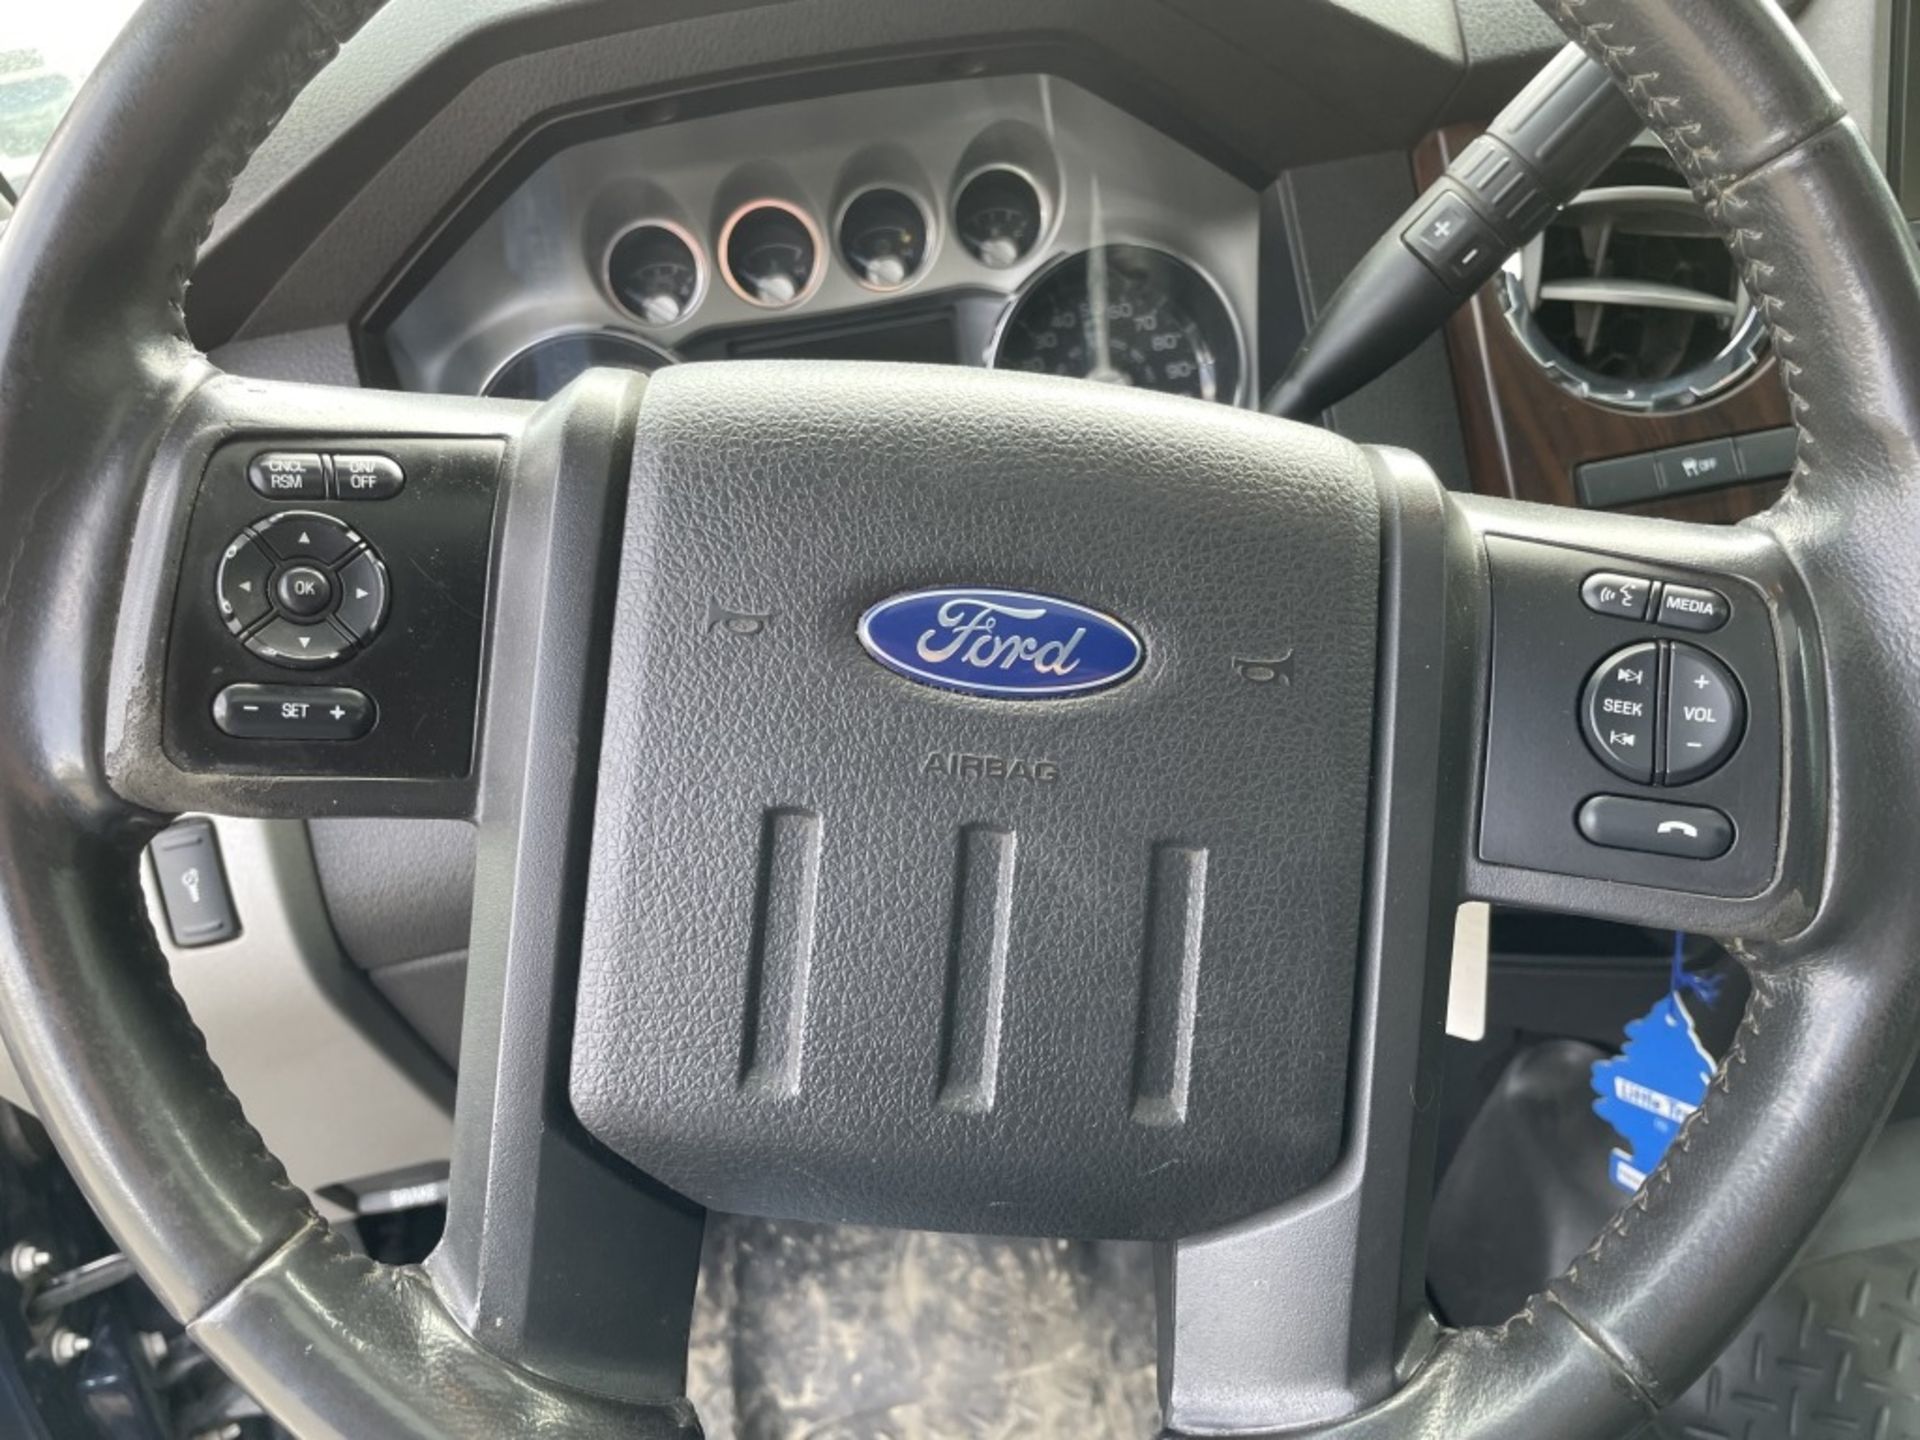 2014 Ford F350 SD Crew Cab 4x4 Pickup - Image 38 of 47